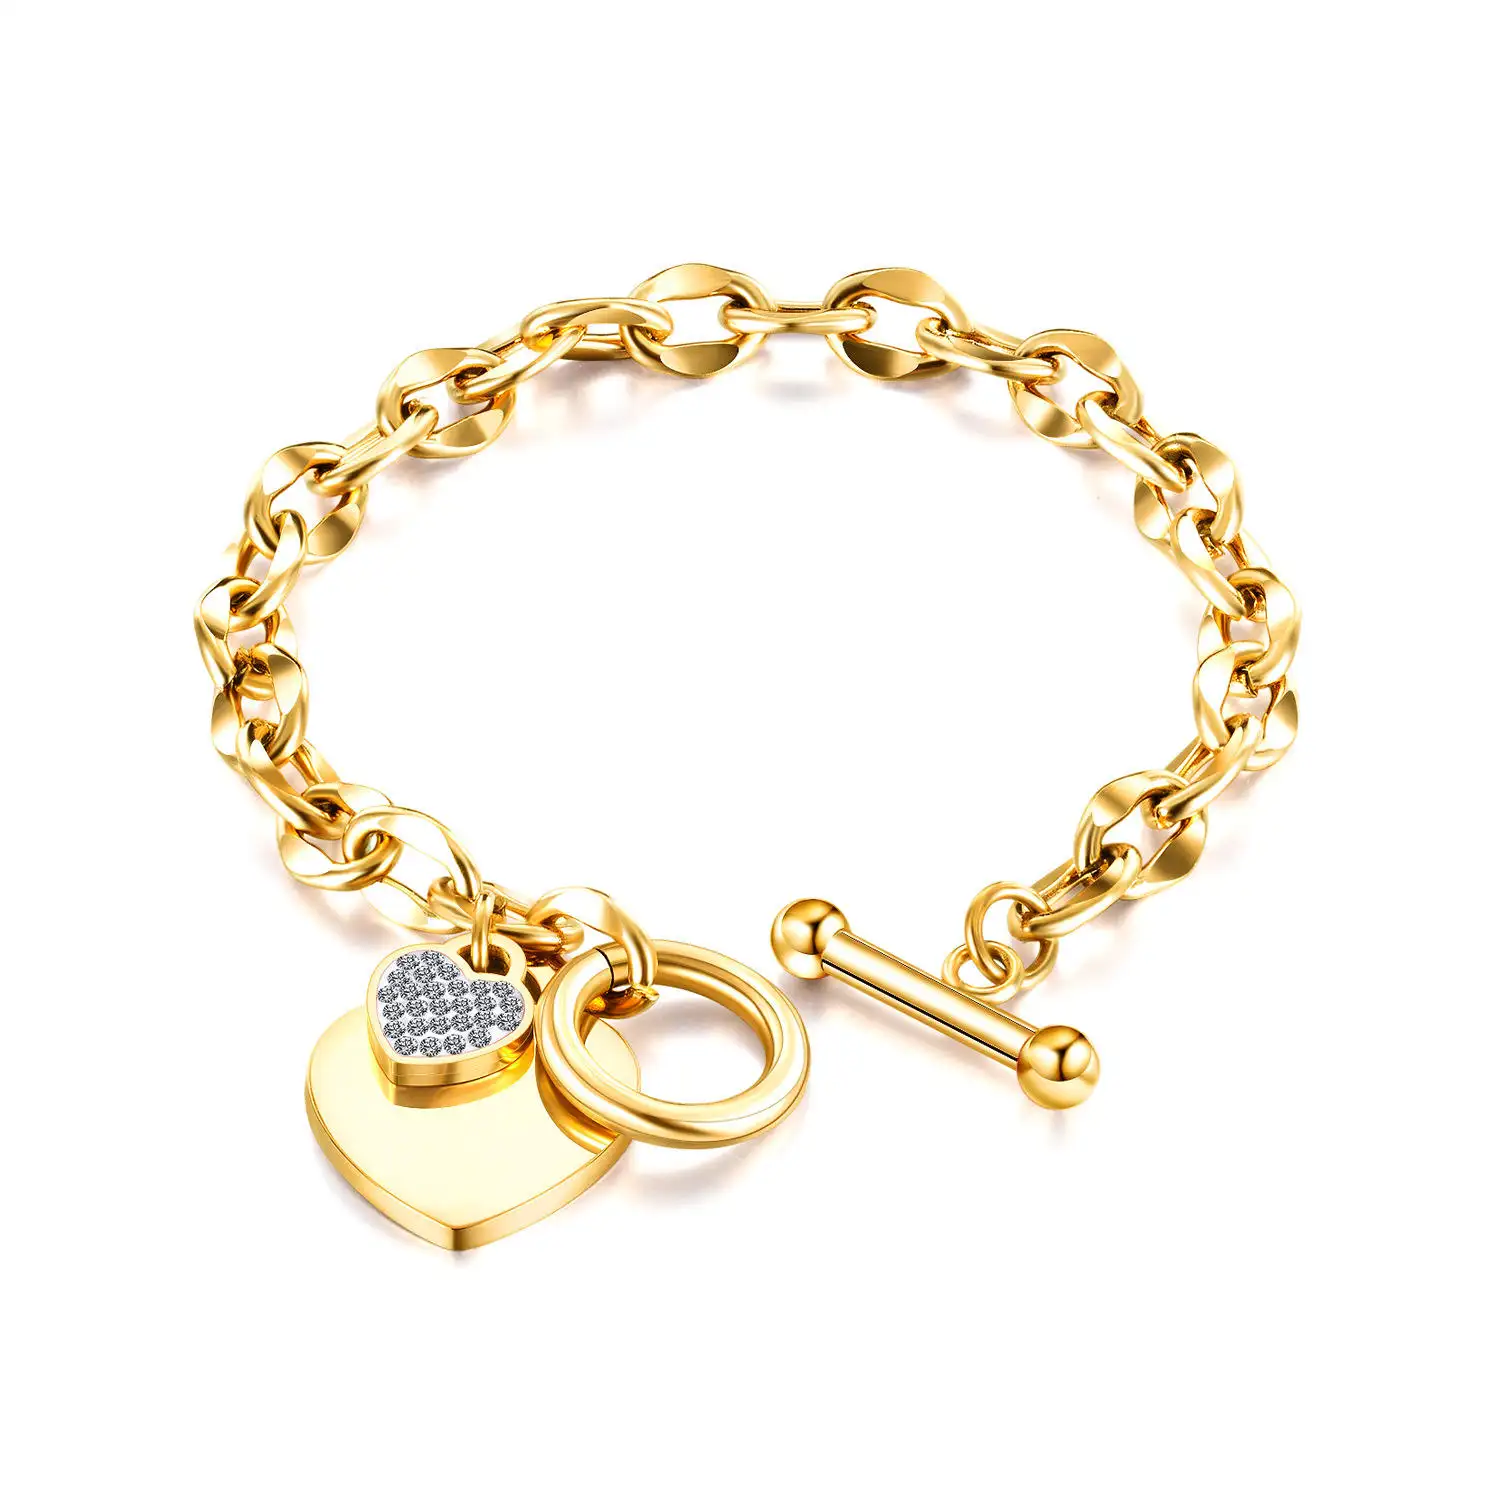 Gold Plated Bracelet Jewelry Stainless Steel Chunky Chain Zircon Heart Charm Toggle Clasp Bracelet Women